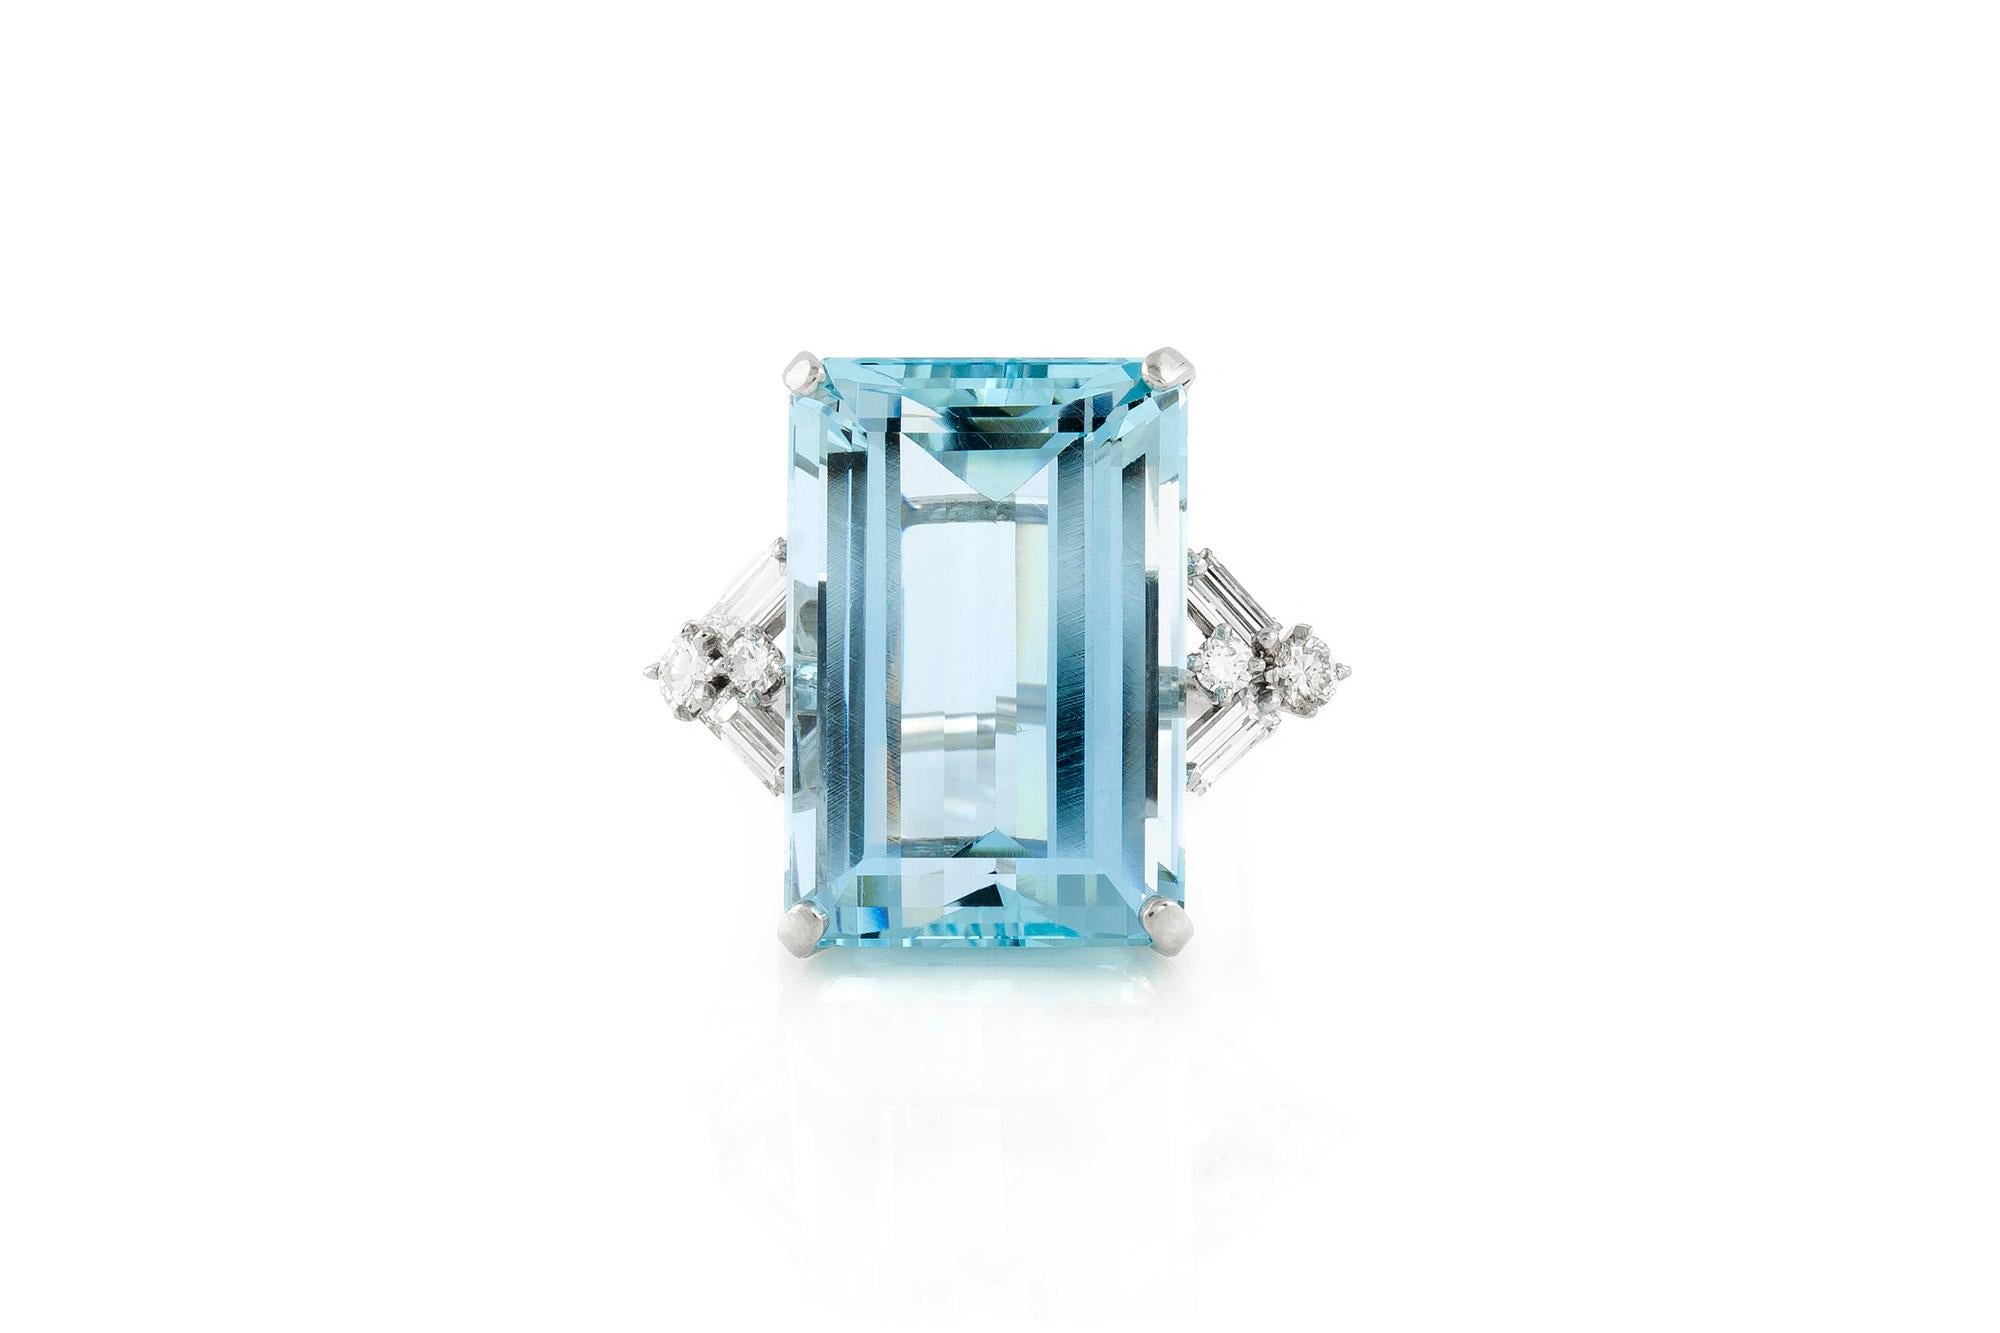 Vintage Art Deco ring, finely crafted in platinum with emerald cut Aquamarine at the center, weighing approximately 35.00 carat. The center stone is flanked by baguette and round brilliant cut diamonds, weighing a total of approximetaly 1.00 carat.